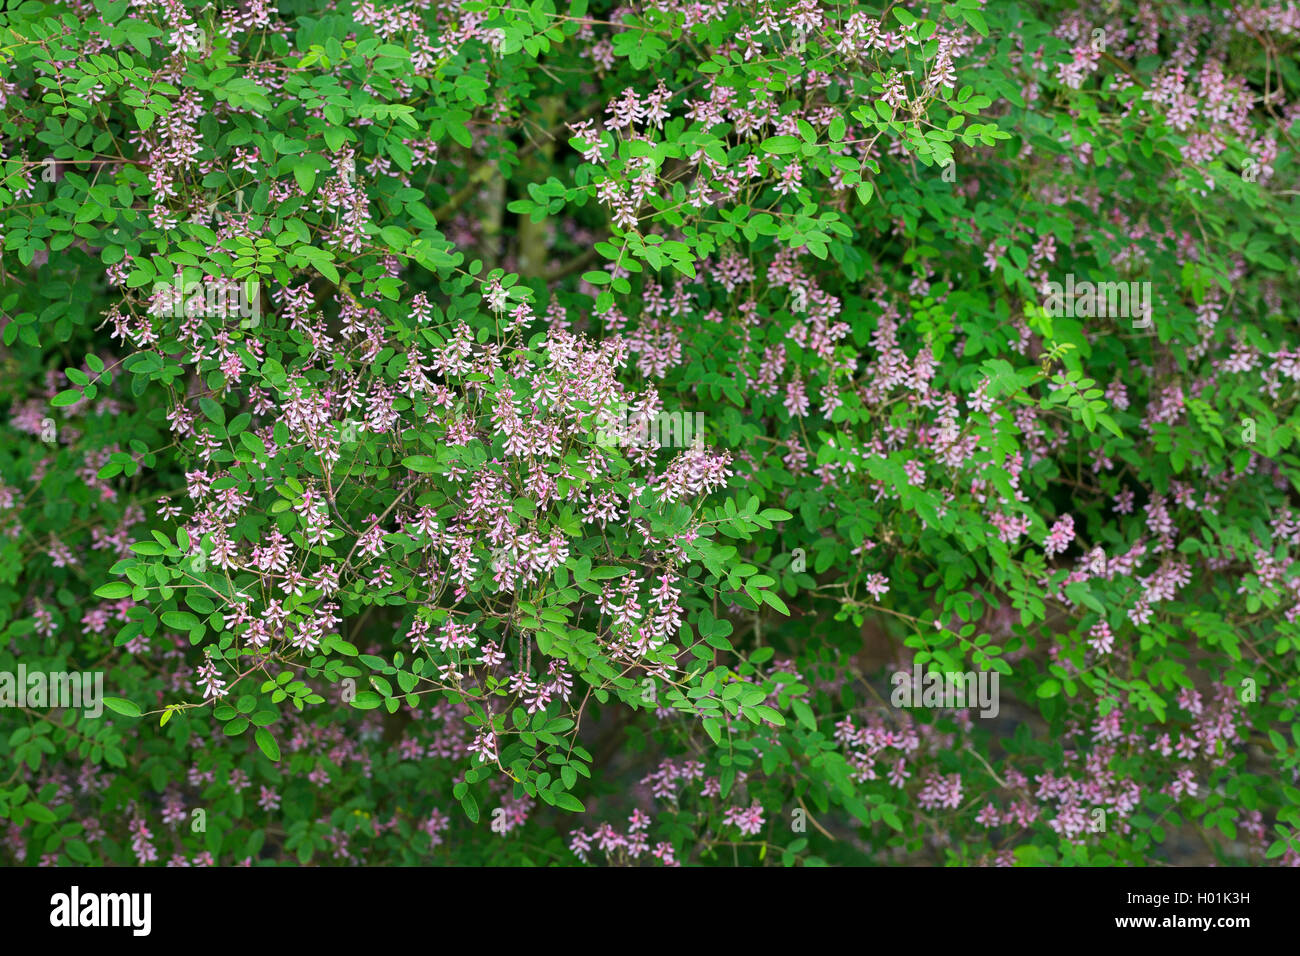 Fleur rose fleur rose, Indigo, indigo Indigo (Indigofera amblyantha chinois), blooming Banque D'Images